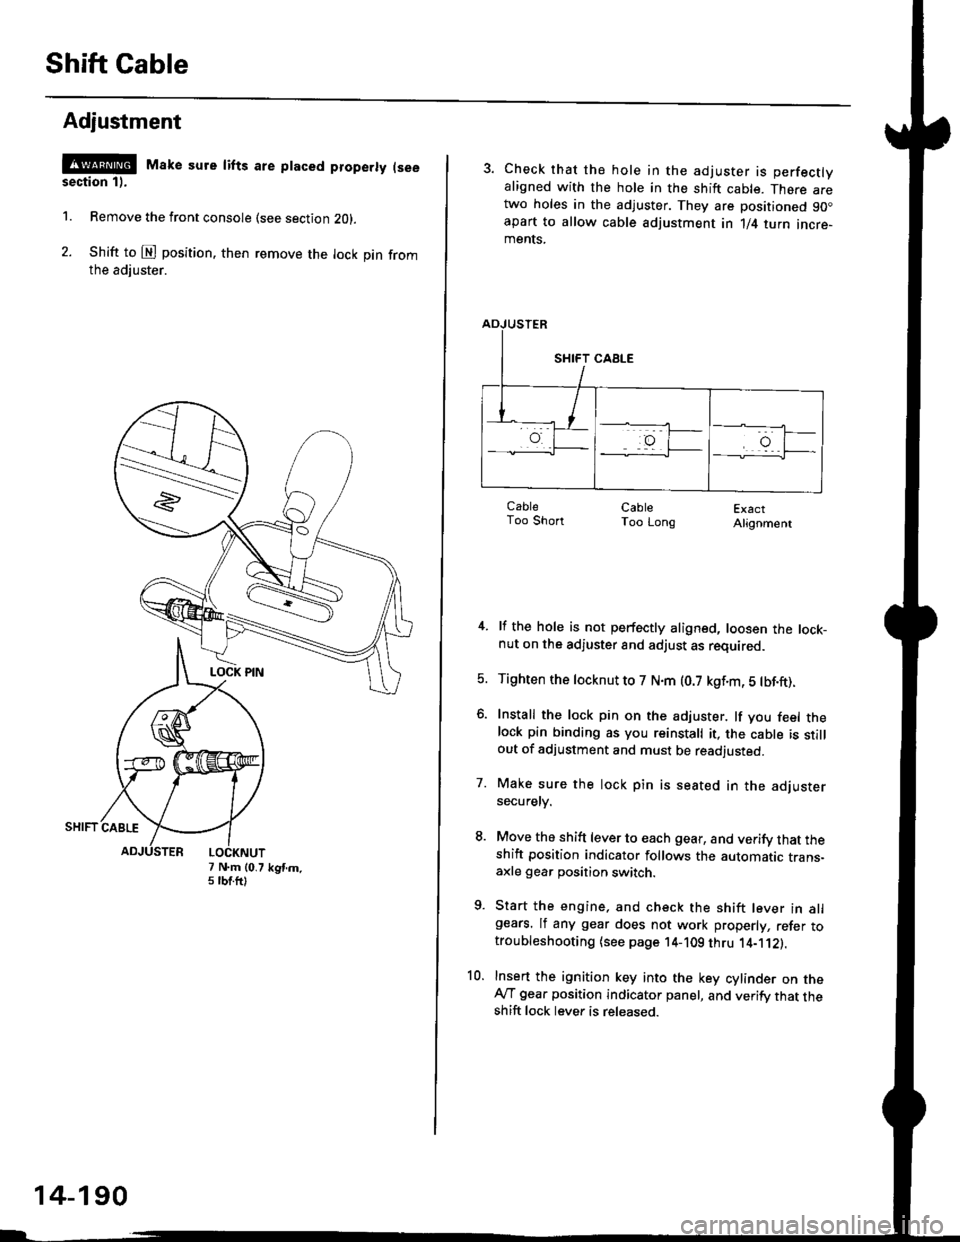 HONDA CIVIC 1996 6.G Workshop Manual Shift Cable
Adjustment
@ Make sure lifts are ptaced properly (see
section 1).
1. Remove the front console (see section Z0l.
2. Shift to @ position. then remove the lock pin fromthe adiuster.
7 N.m (0.